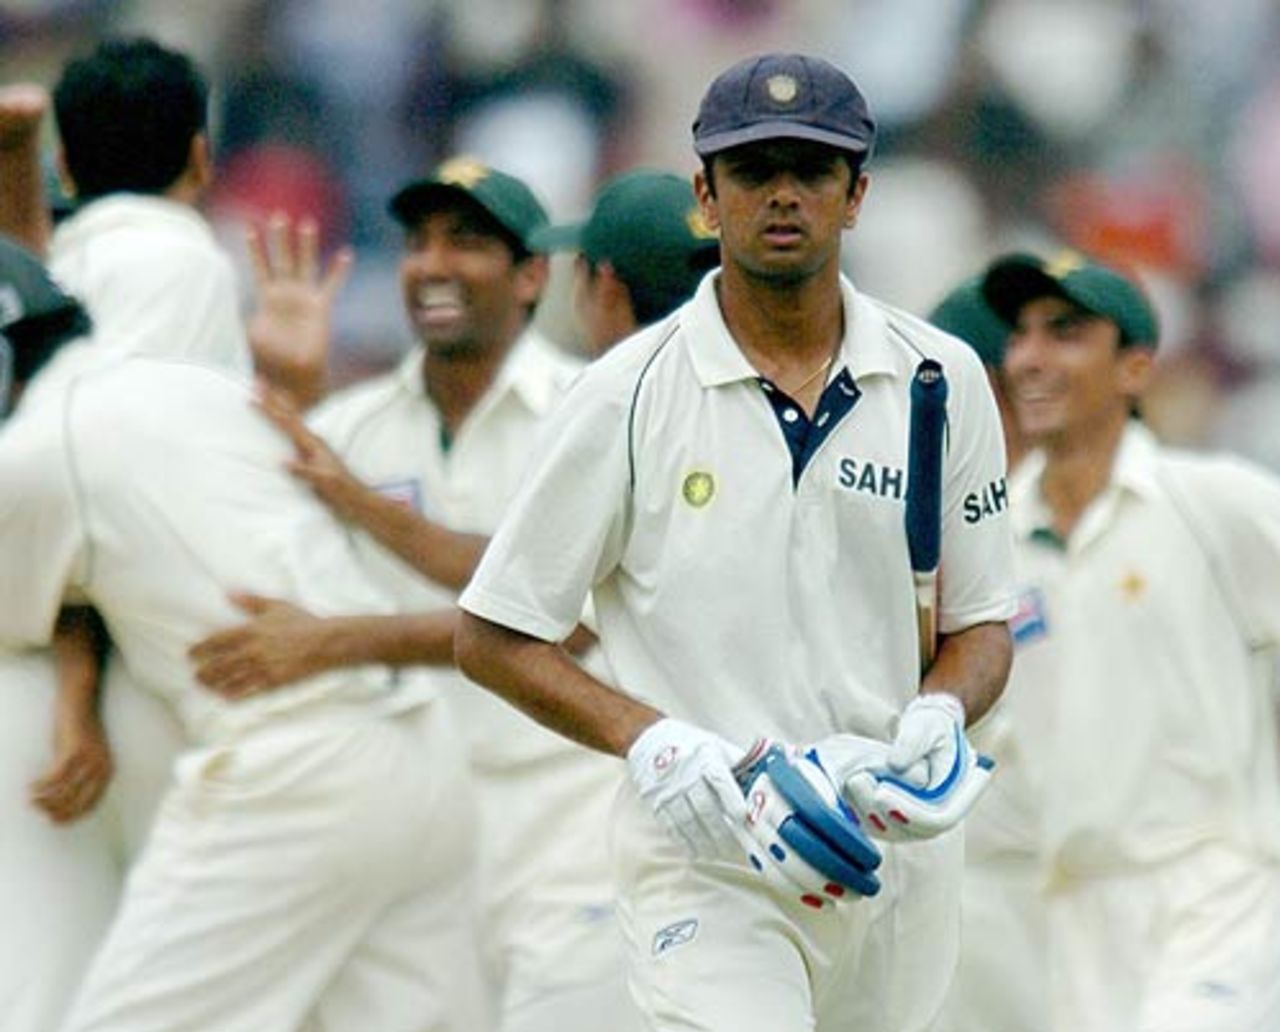 Rahul Dravid, a man best equipped to bat out day, fell soon after to Arshad Khan, who claimed his first wicket of the series, India v Pakistan, 3rd Test, Bangalore, 5th day, March 28, 2005